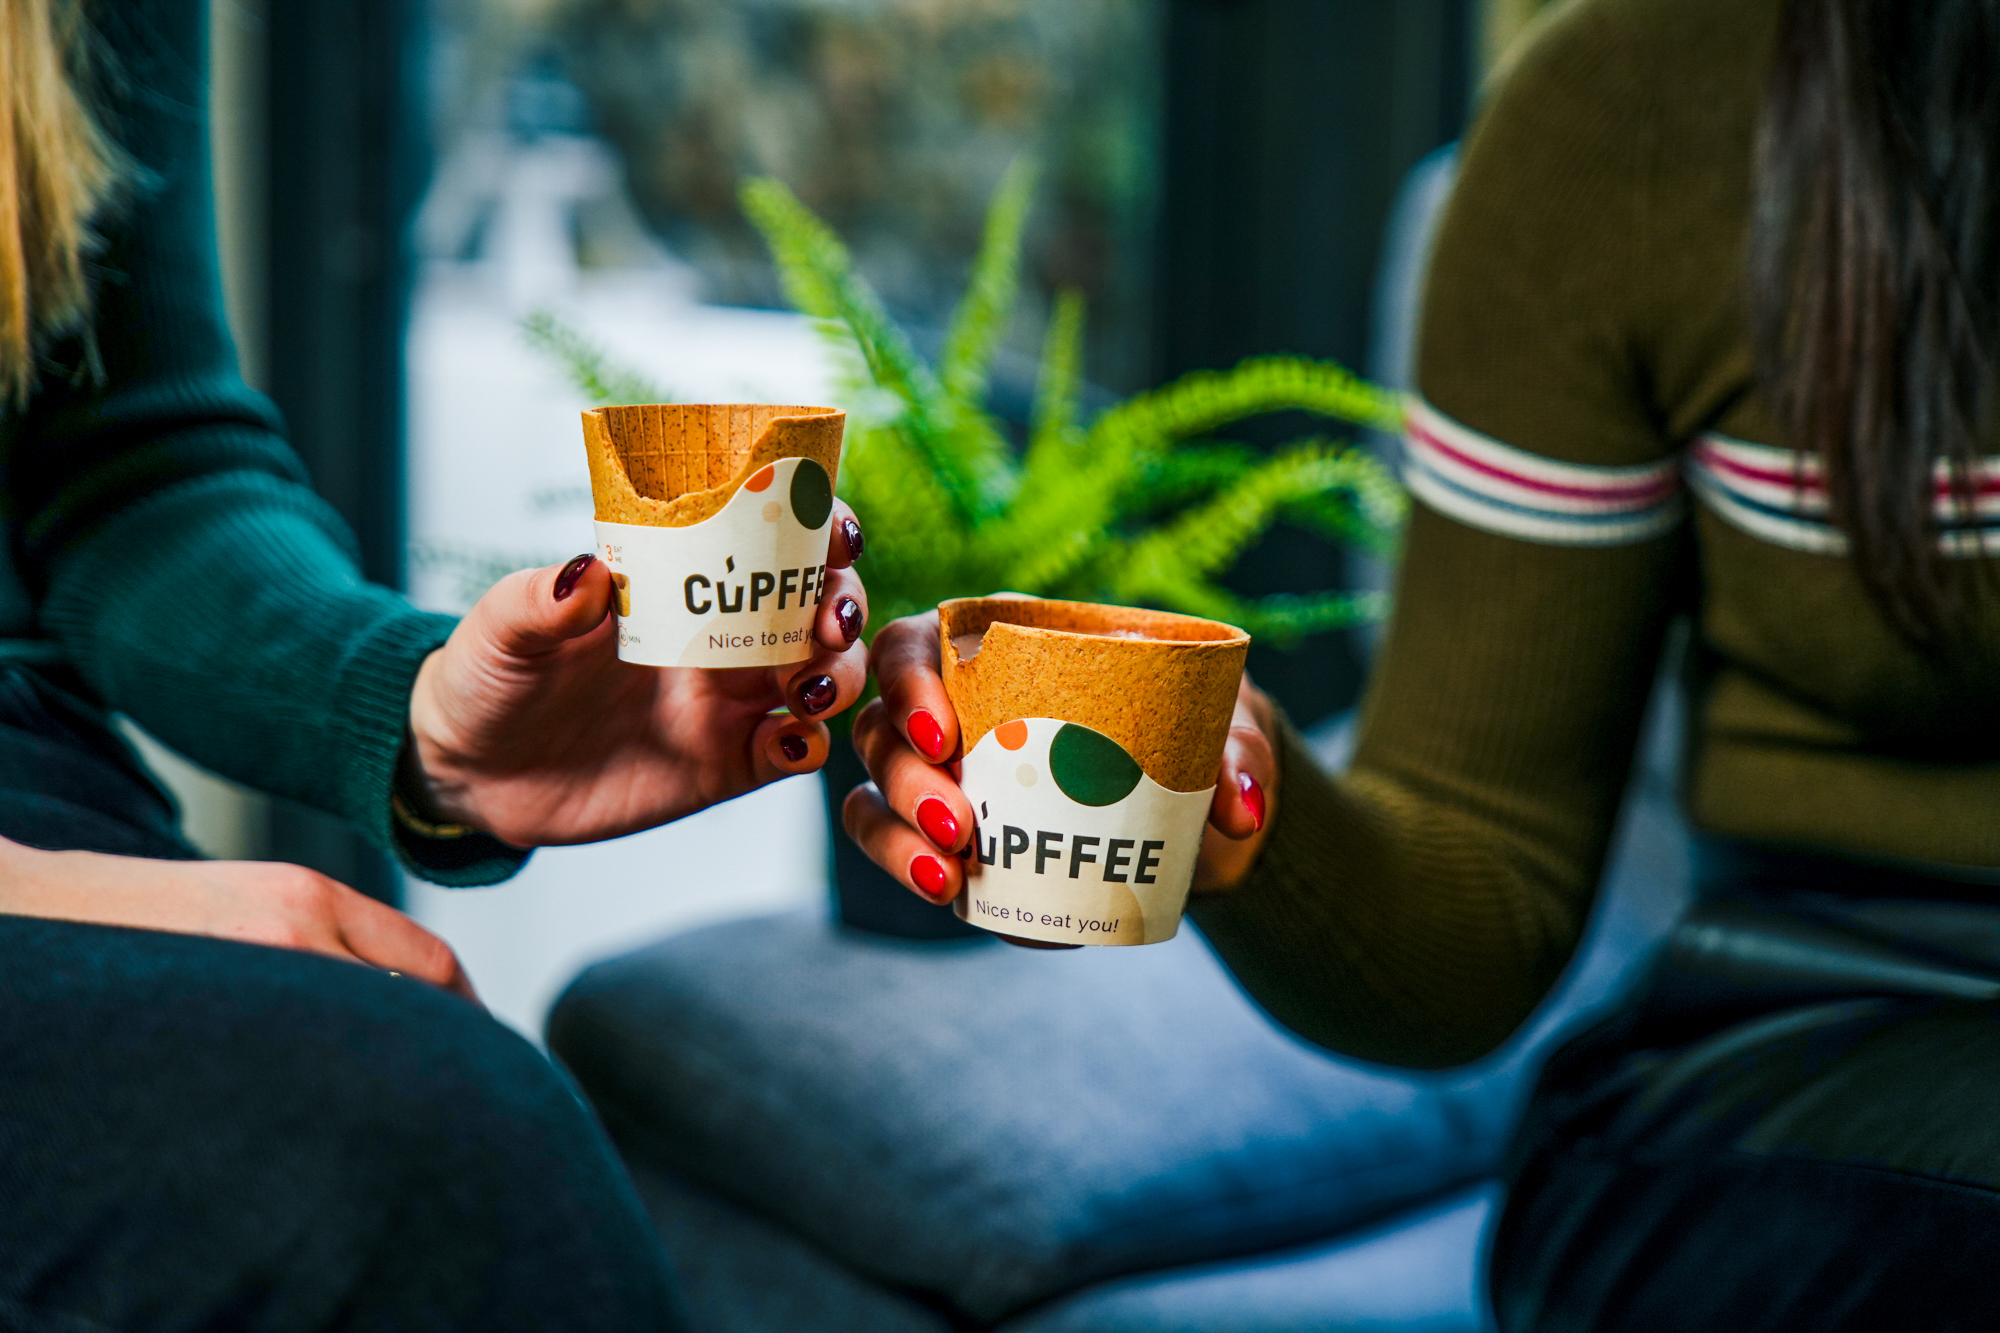 Take a Bite Out of Cupffee, the Edible Coffee Cup